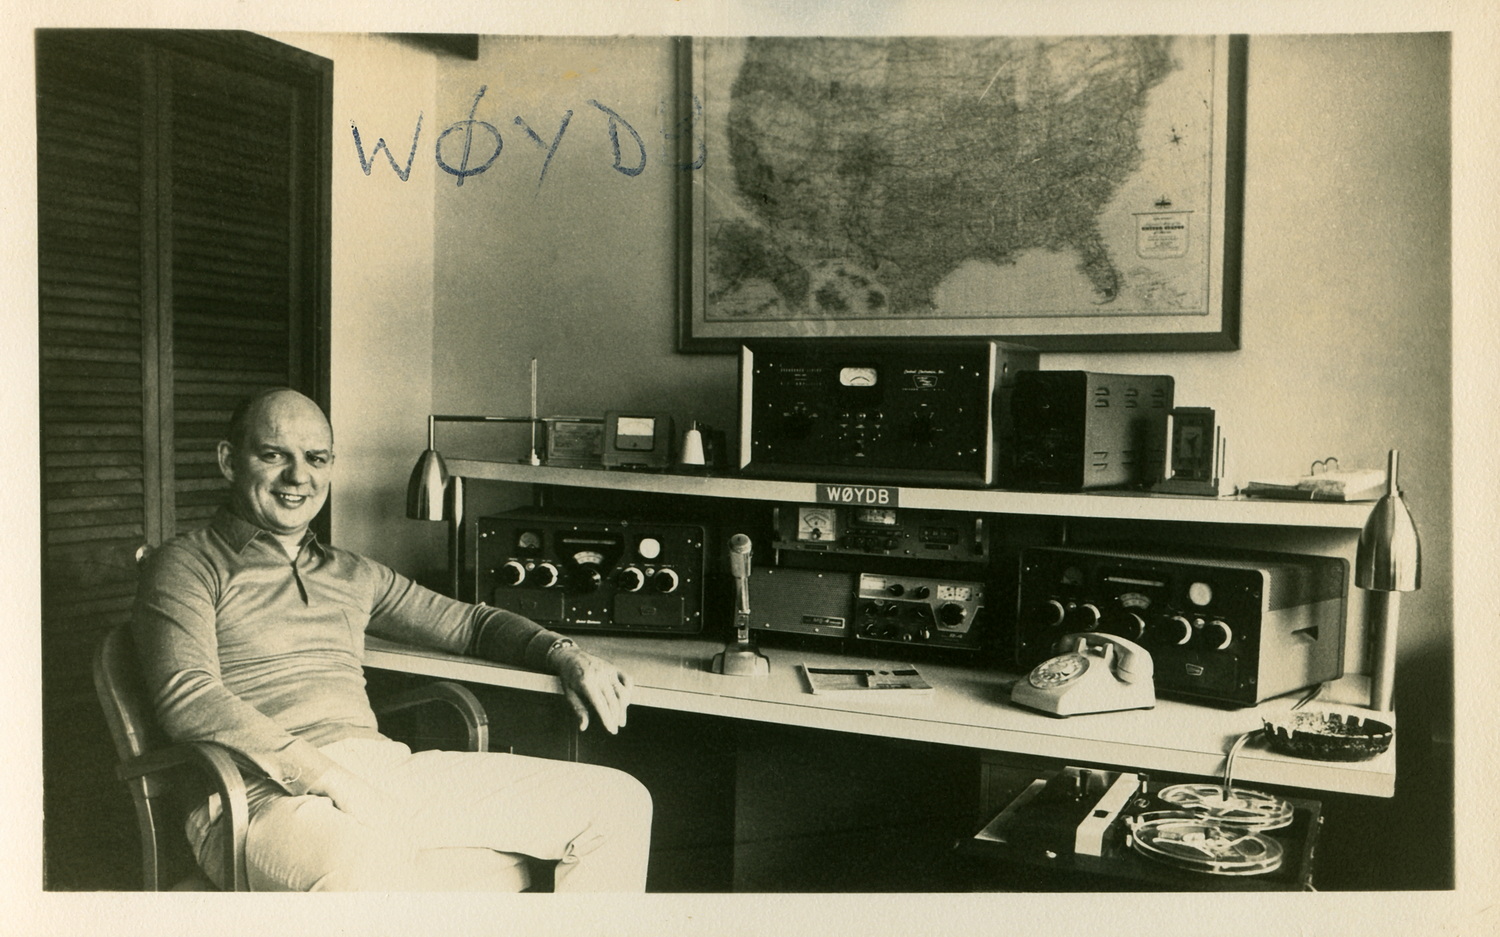 W0YDB (Bill), QSO on 18th April 1966 on 21.259 MHz, where he apologised for the terrible band condition, but it sounded like the band was failing, but he did manage to finally get Douglas in the logbook 'twice'.